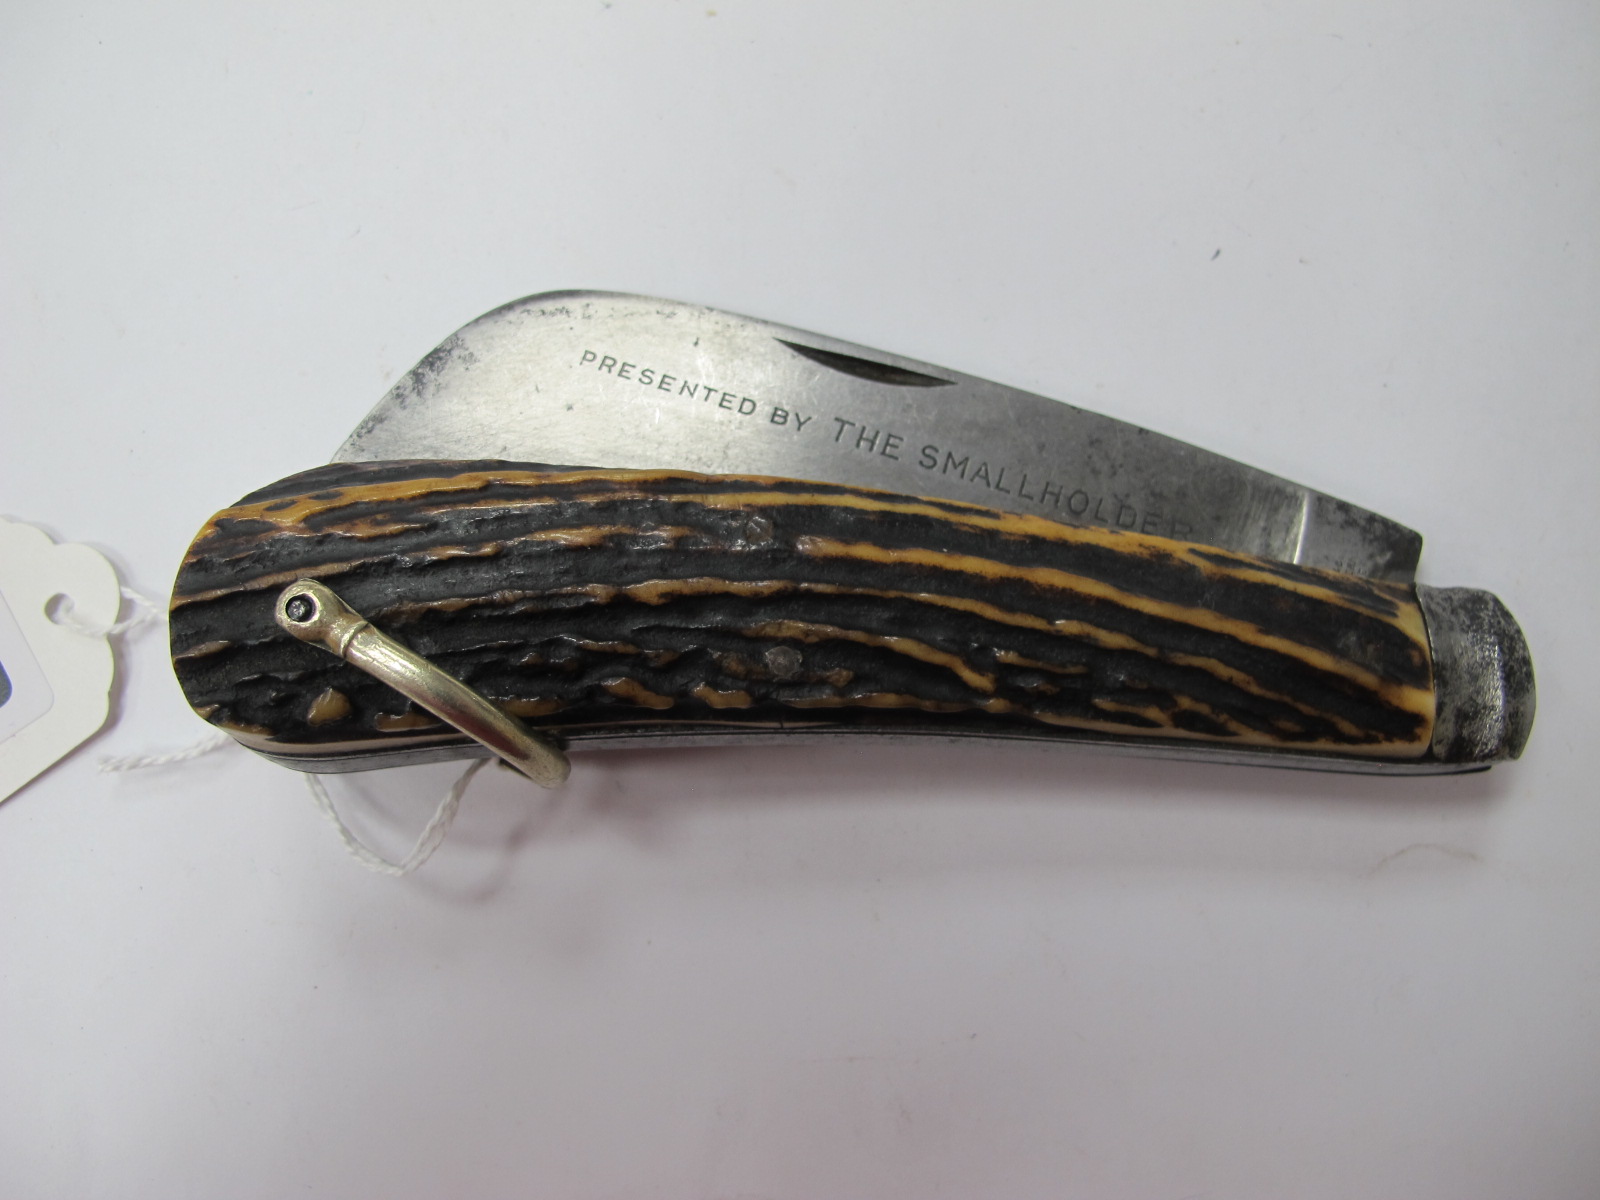 A Pocket Knife/Large Pruner, presented to 'The Small Holder' embossed on blade, by Wylie and Co,